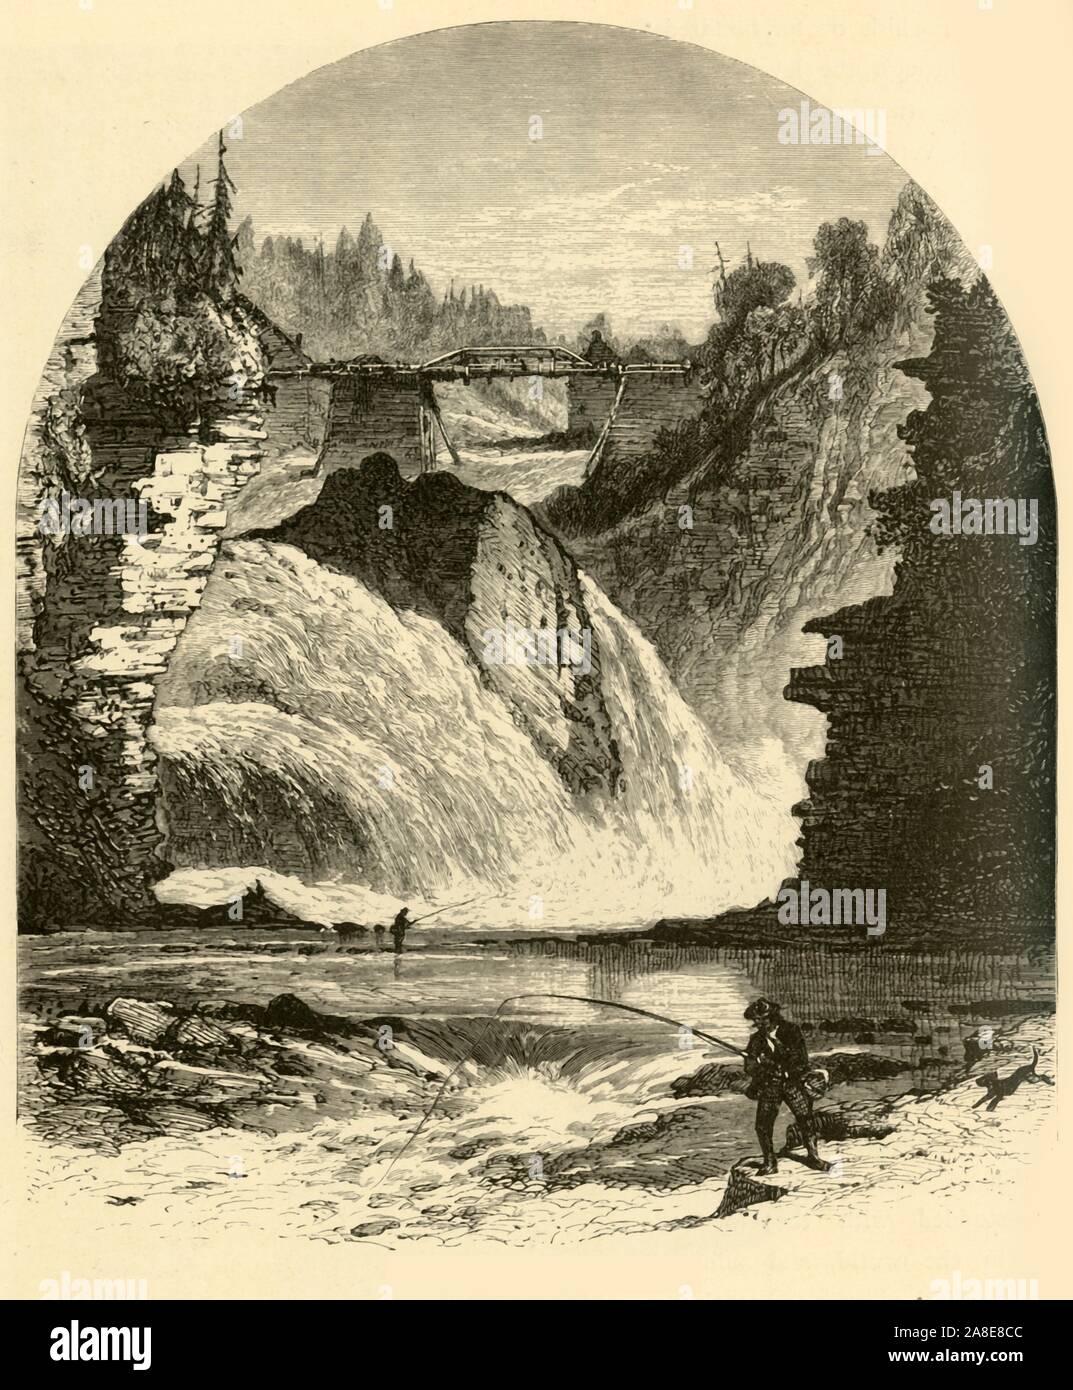 'Birmingham Falls, Ausable Chasm', 1874. Waterfall, (later renamed Rainbow Falls), in the Ausable Chasm near Keeseville, New York State, USA. '...the Ausable chasm, which afford some of the wildest and most impressive scenes to be found on this side of the Rocky Mountains. At the distance of a mile or so from Keeseville is Birmingham Falls, where the Ausable [river] descends about thirty feet into a semicircular basin of great beauty'. From &quot;Picturesque America; or, The Land We Live In, A Delineation by Pen and Pencil of the Mountains, Rivers, Lakes...with Illustrations on Steel and Wood Stock Photo